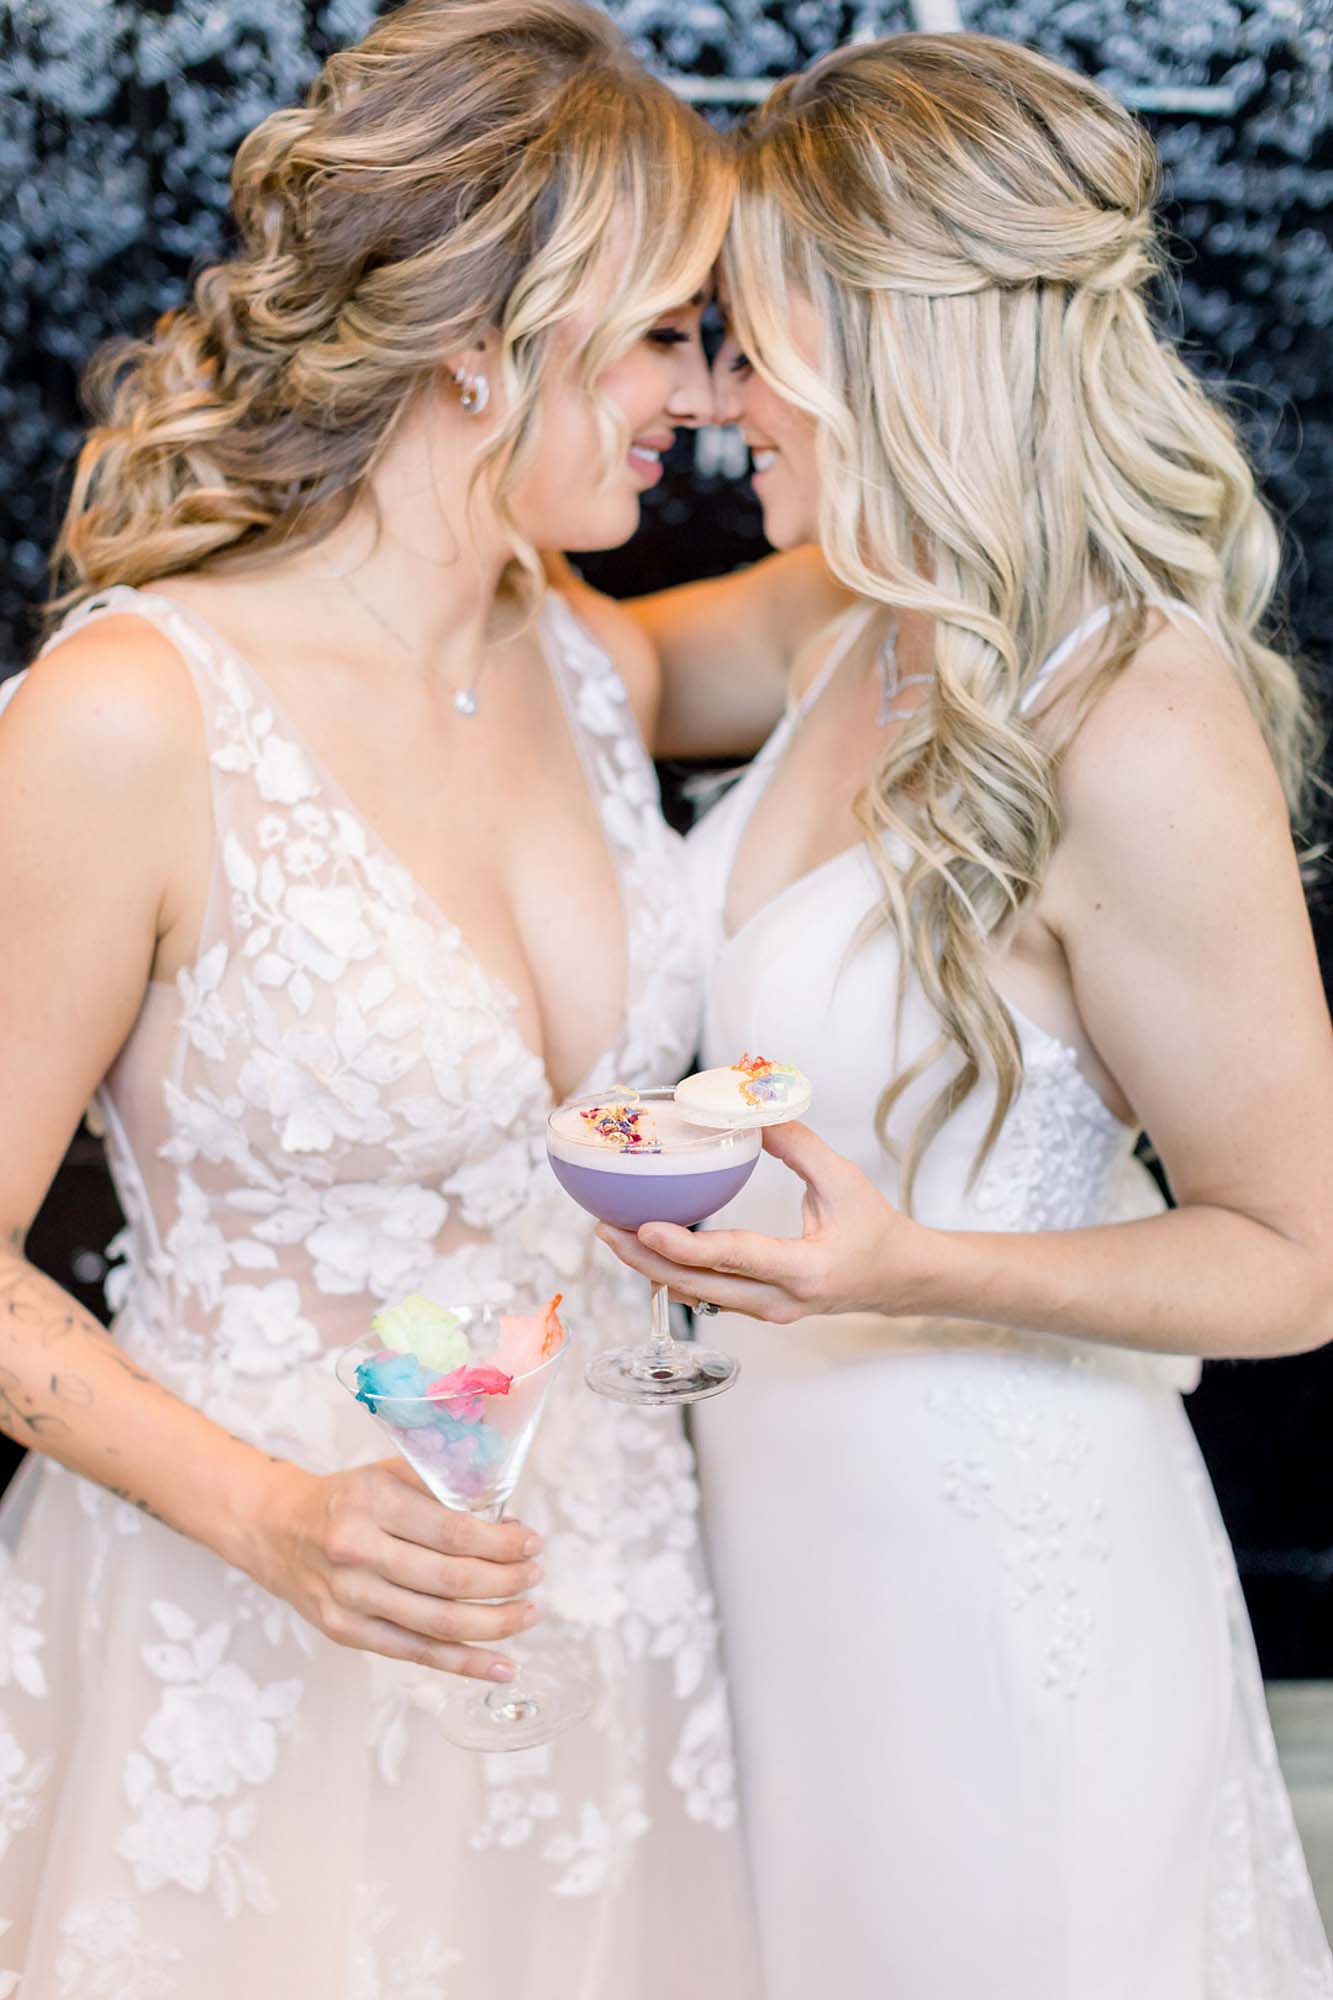 Chic and whimsical Pride-themed wedding ideas | Alexis Belli Photography | Featured on Equally Wed, the leading LGBTQ+ wedding magazine